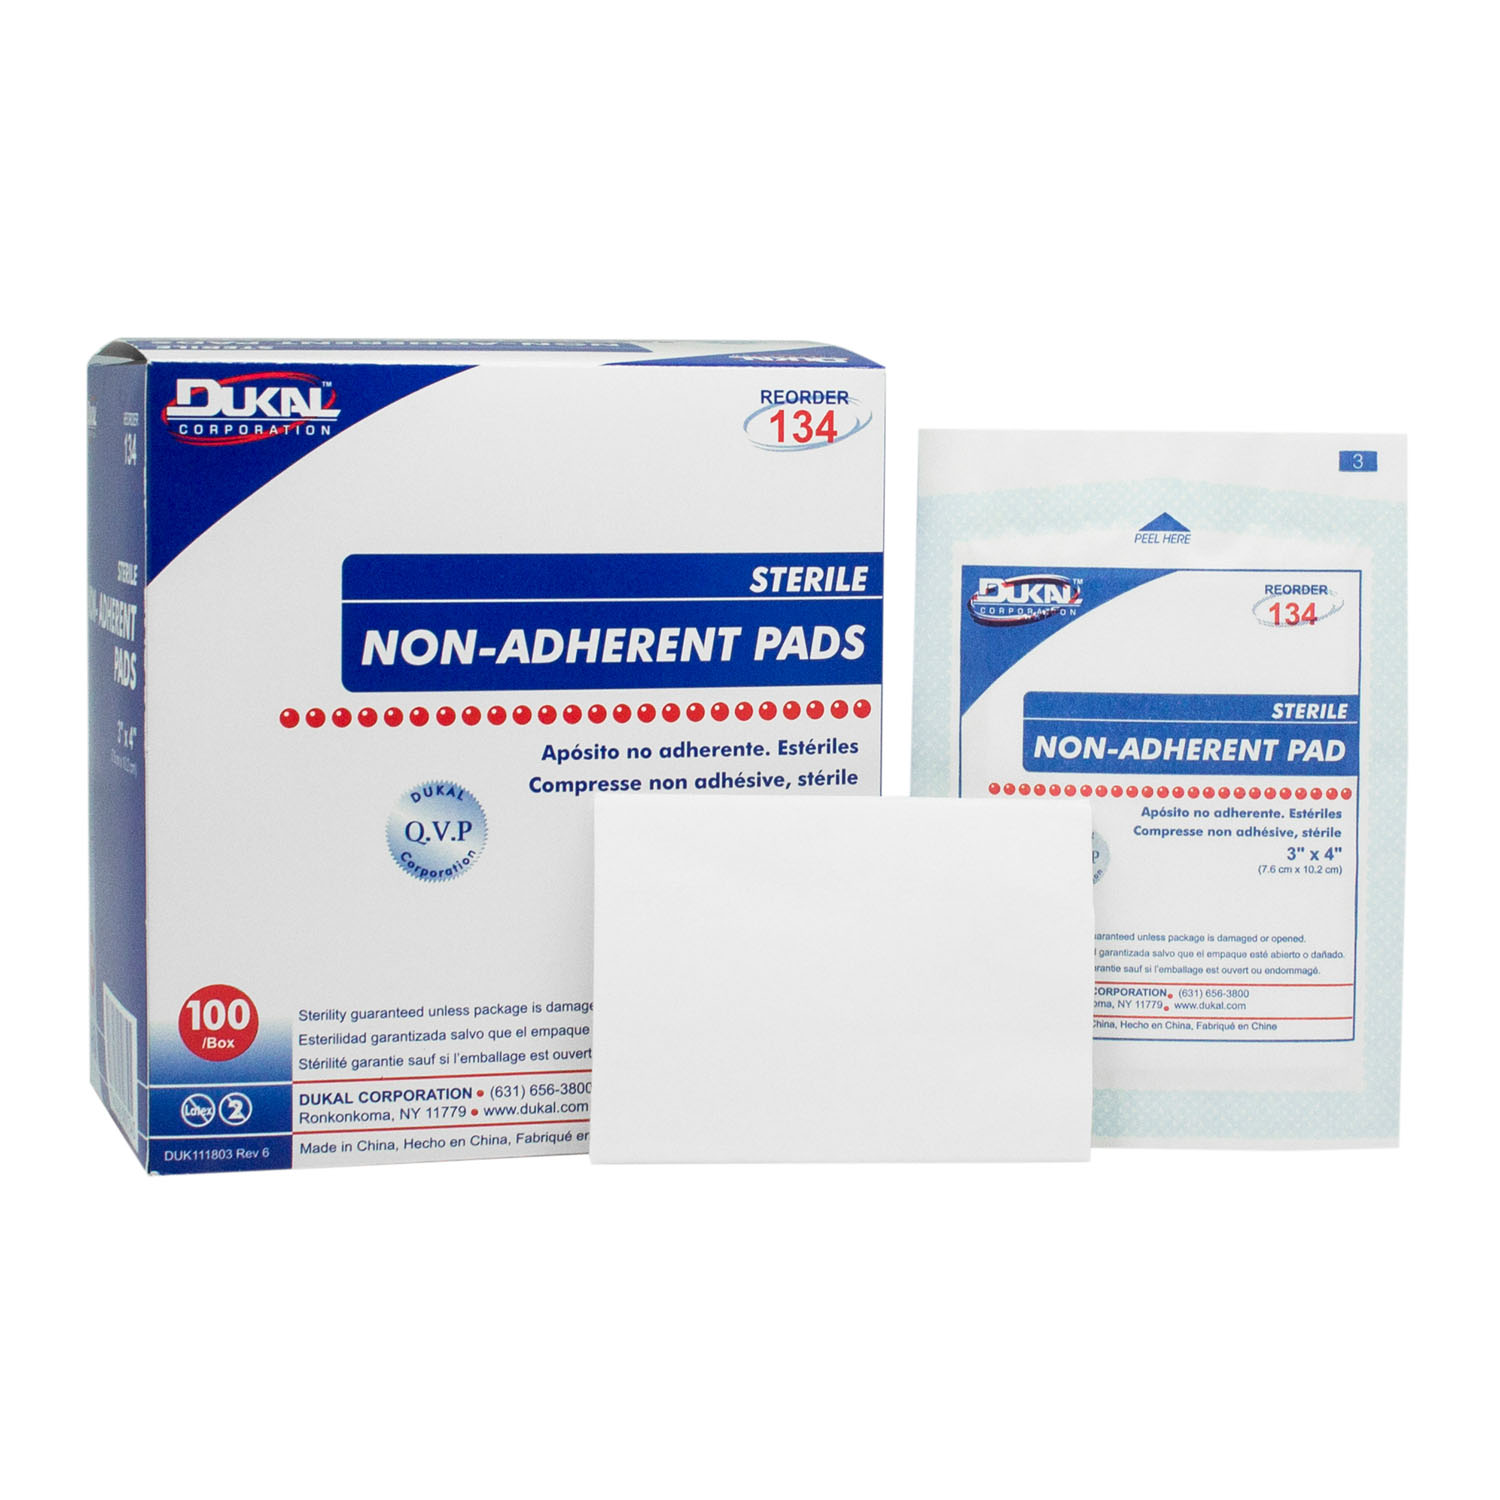 DUKAL NON-ADHERENT PADS : 134 BX $12.29 Stocked